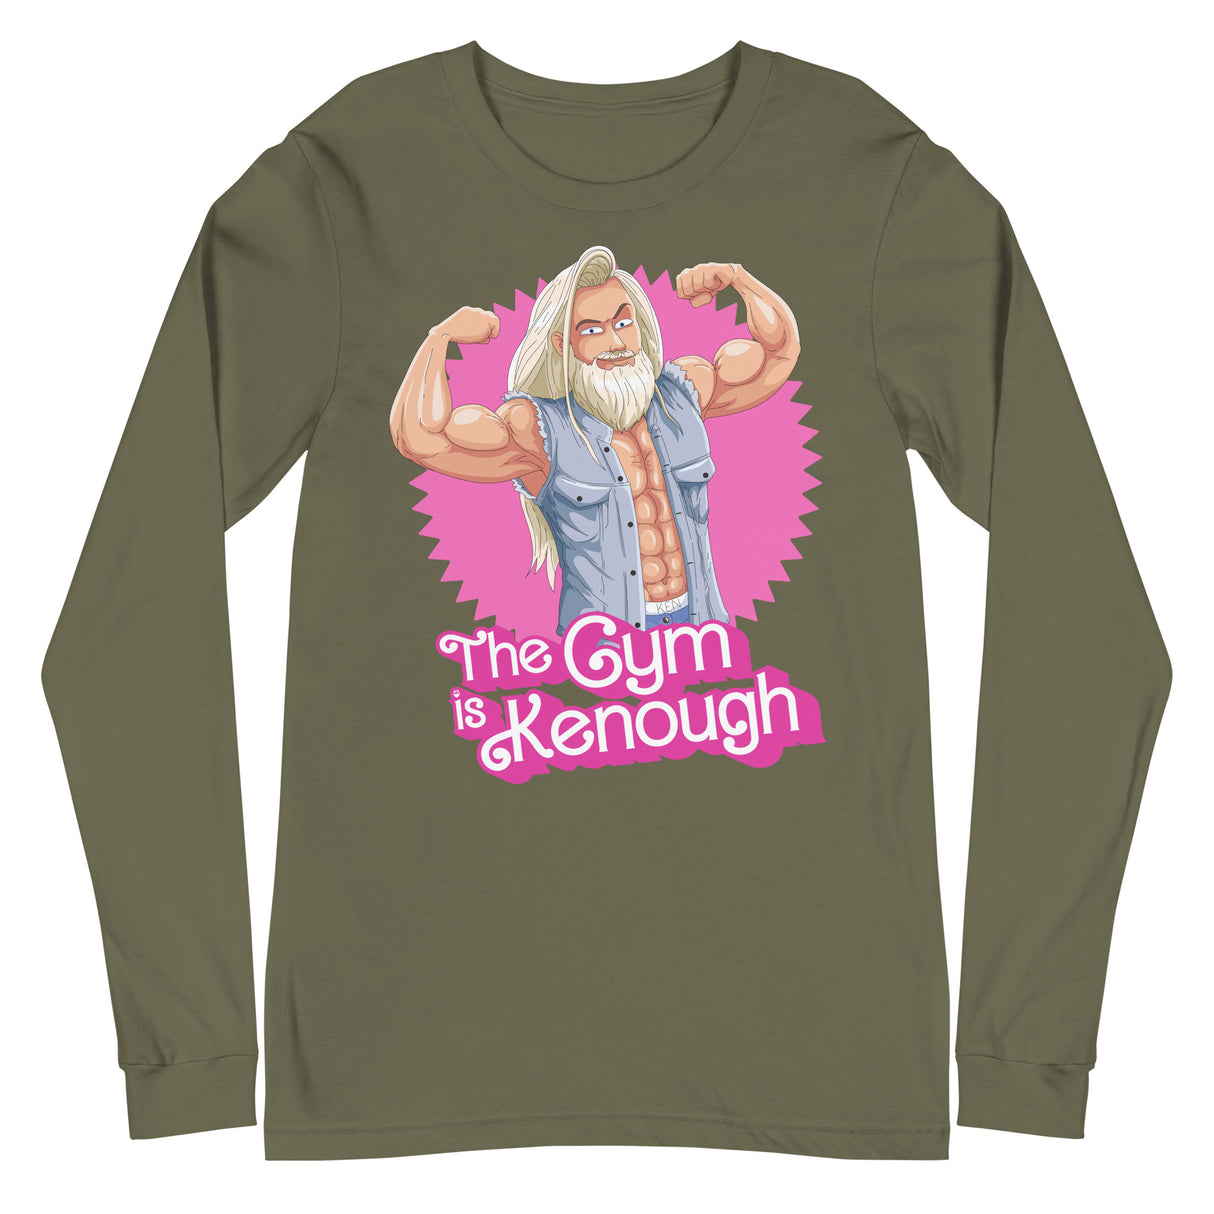 The Gym Is Kenough (Image) Long Sleeve T-Shirt